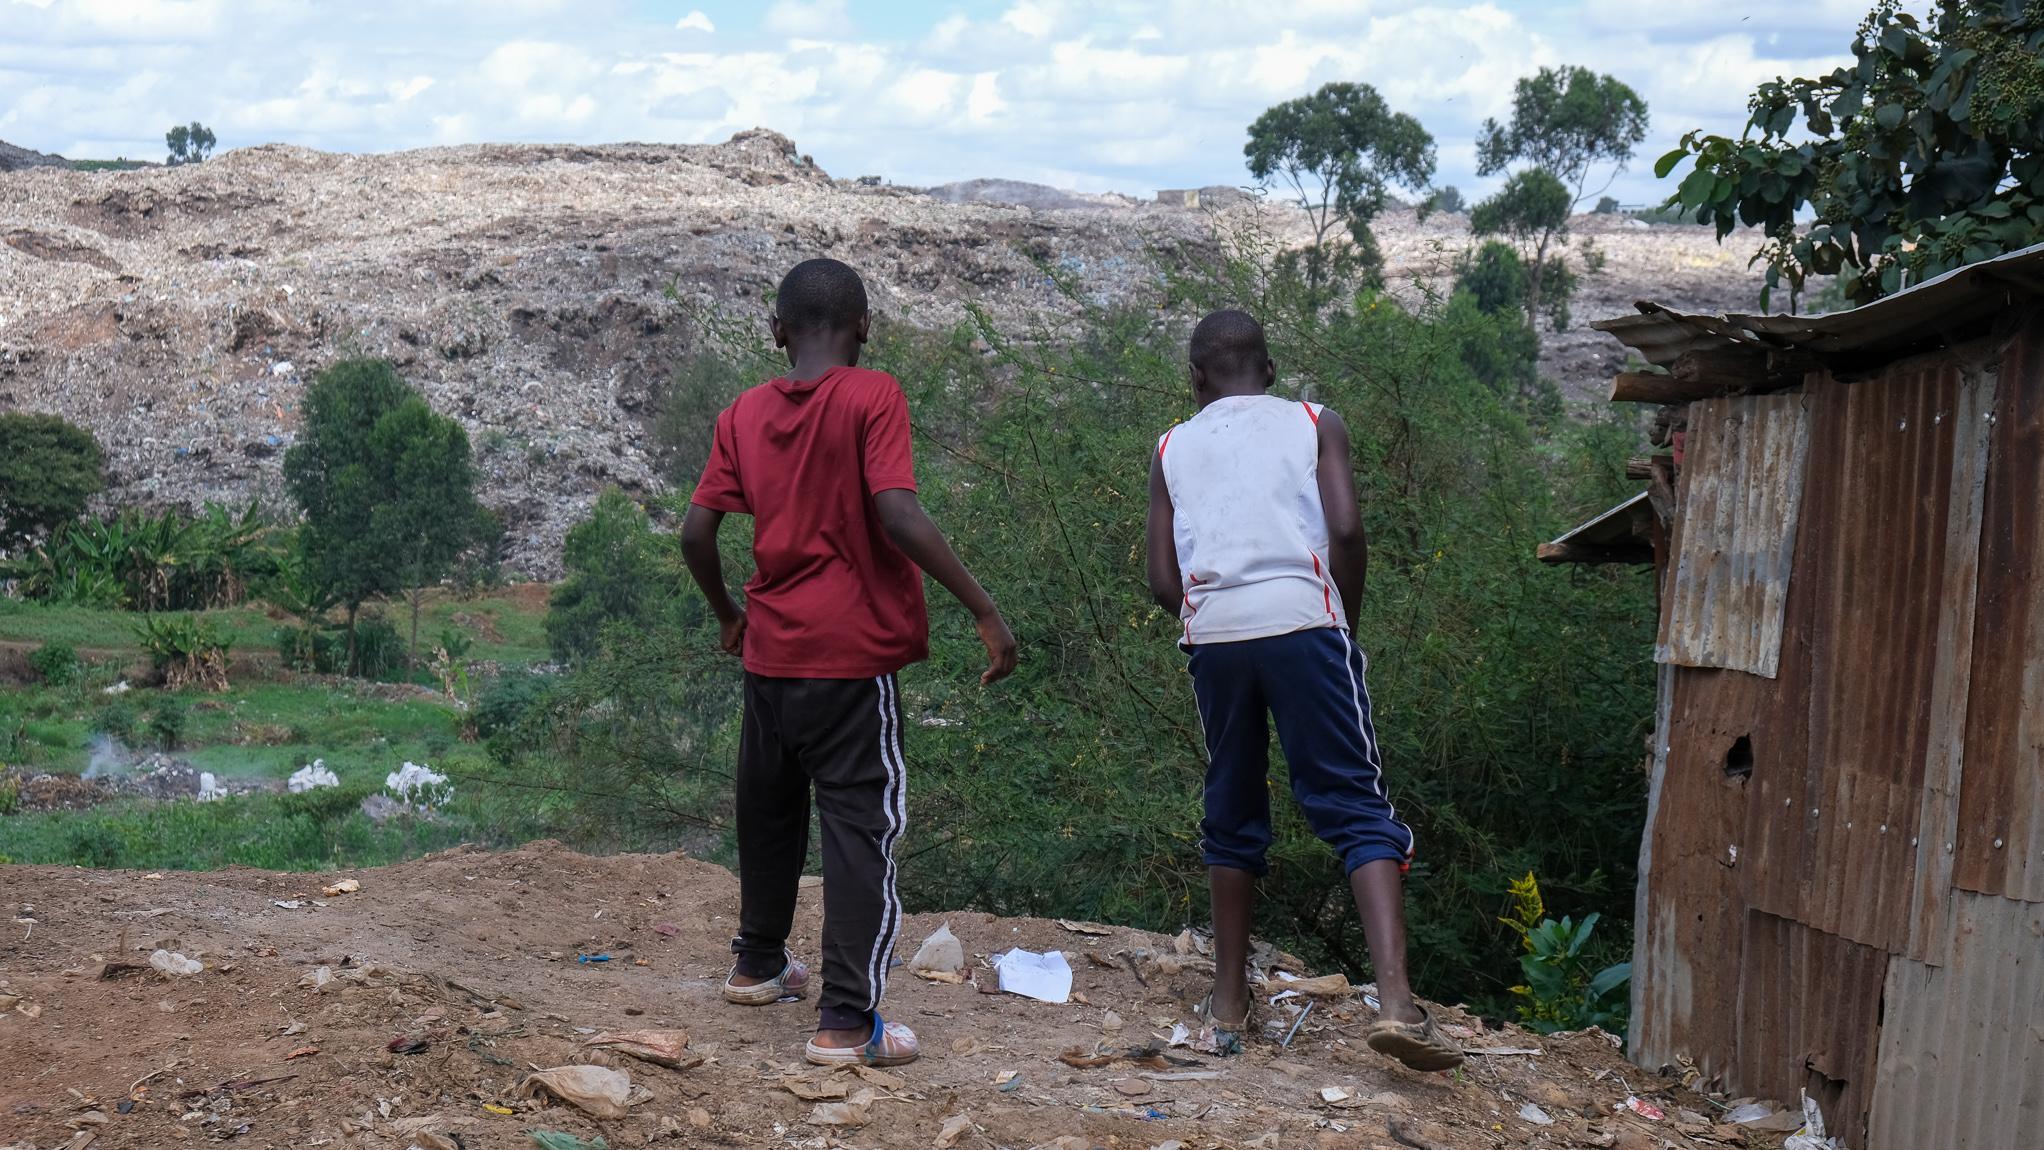 In front of the garbage dump in Korogocho